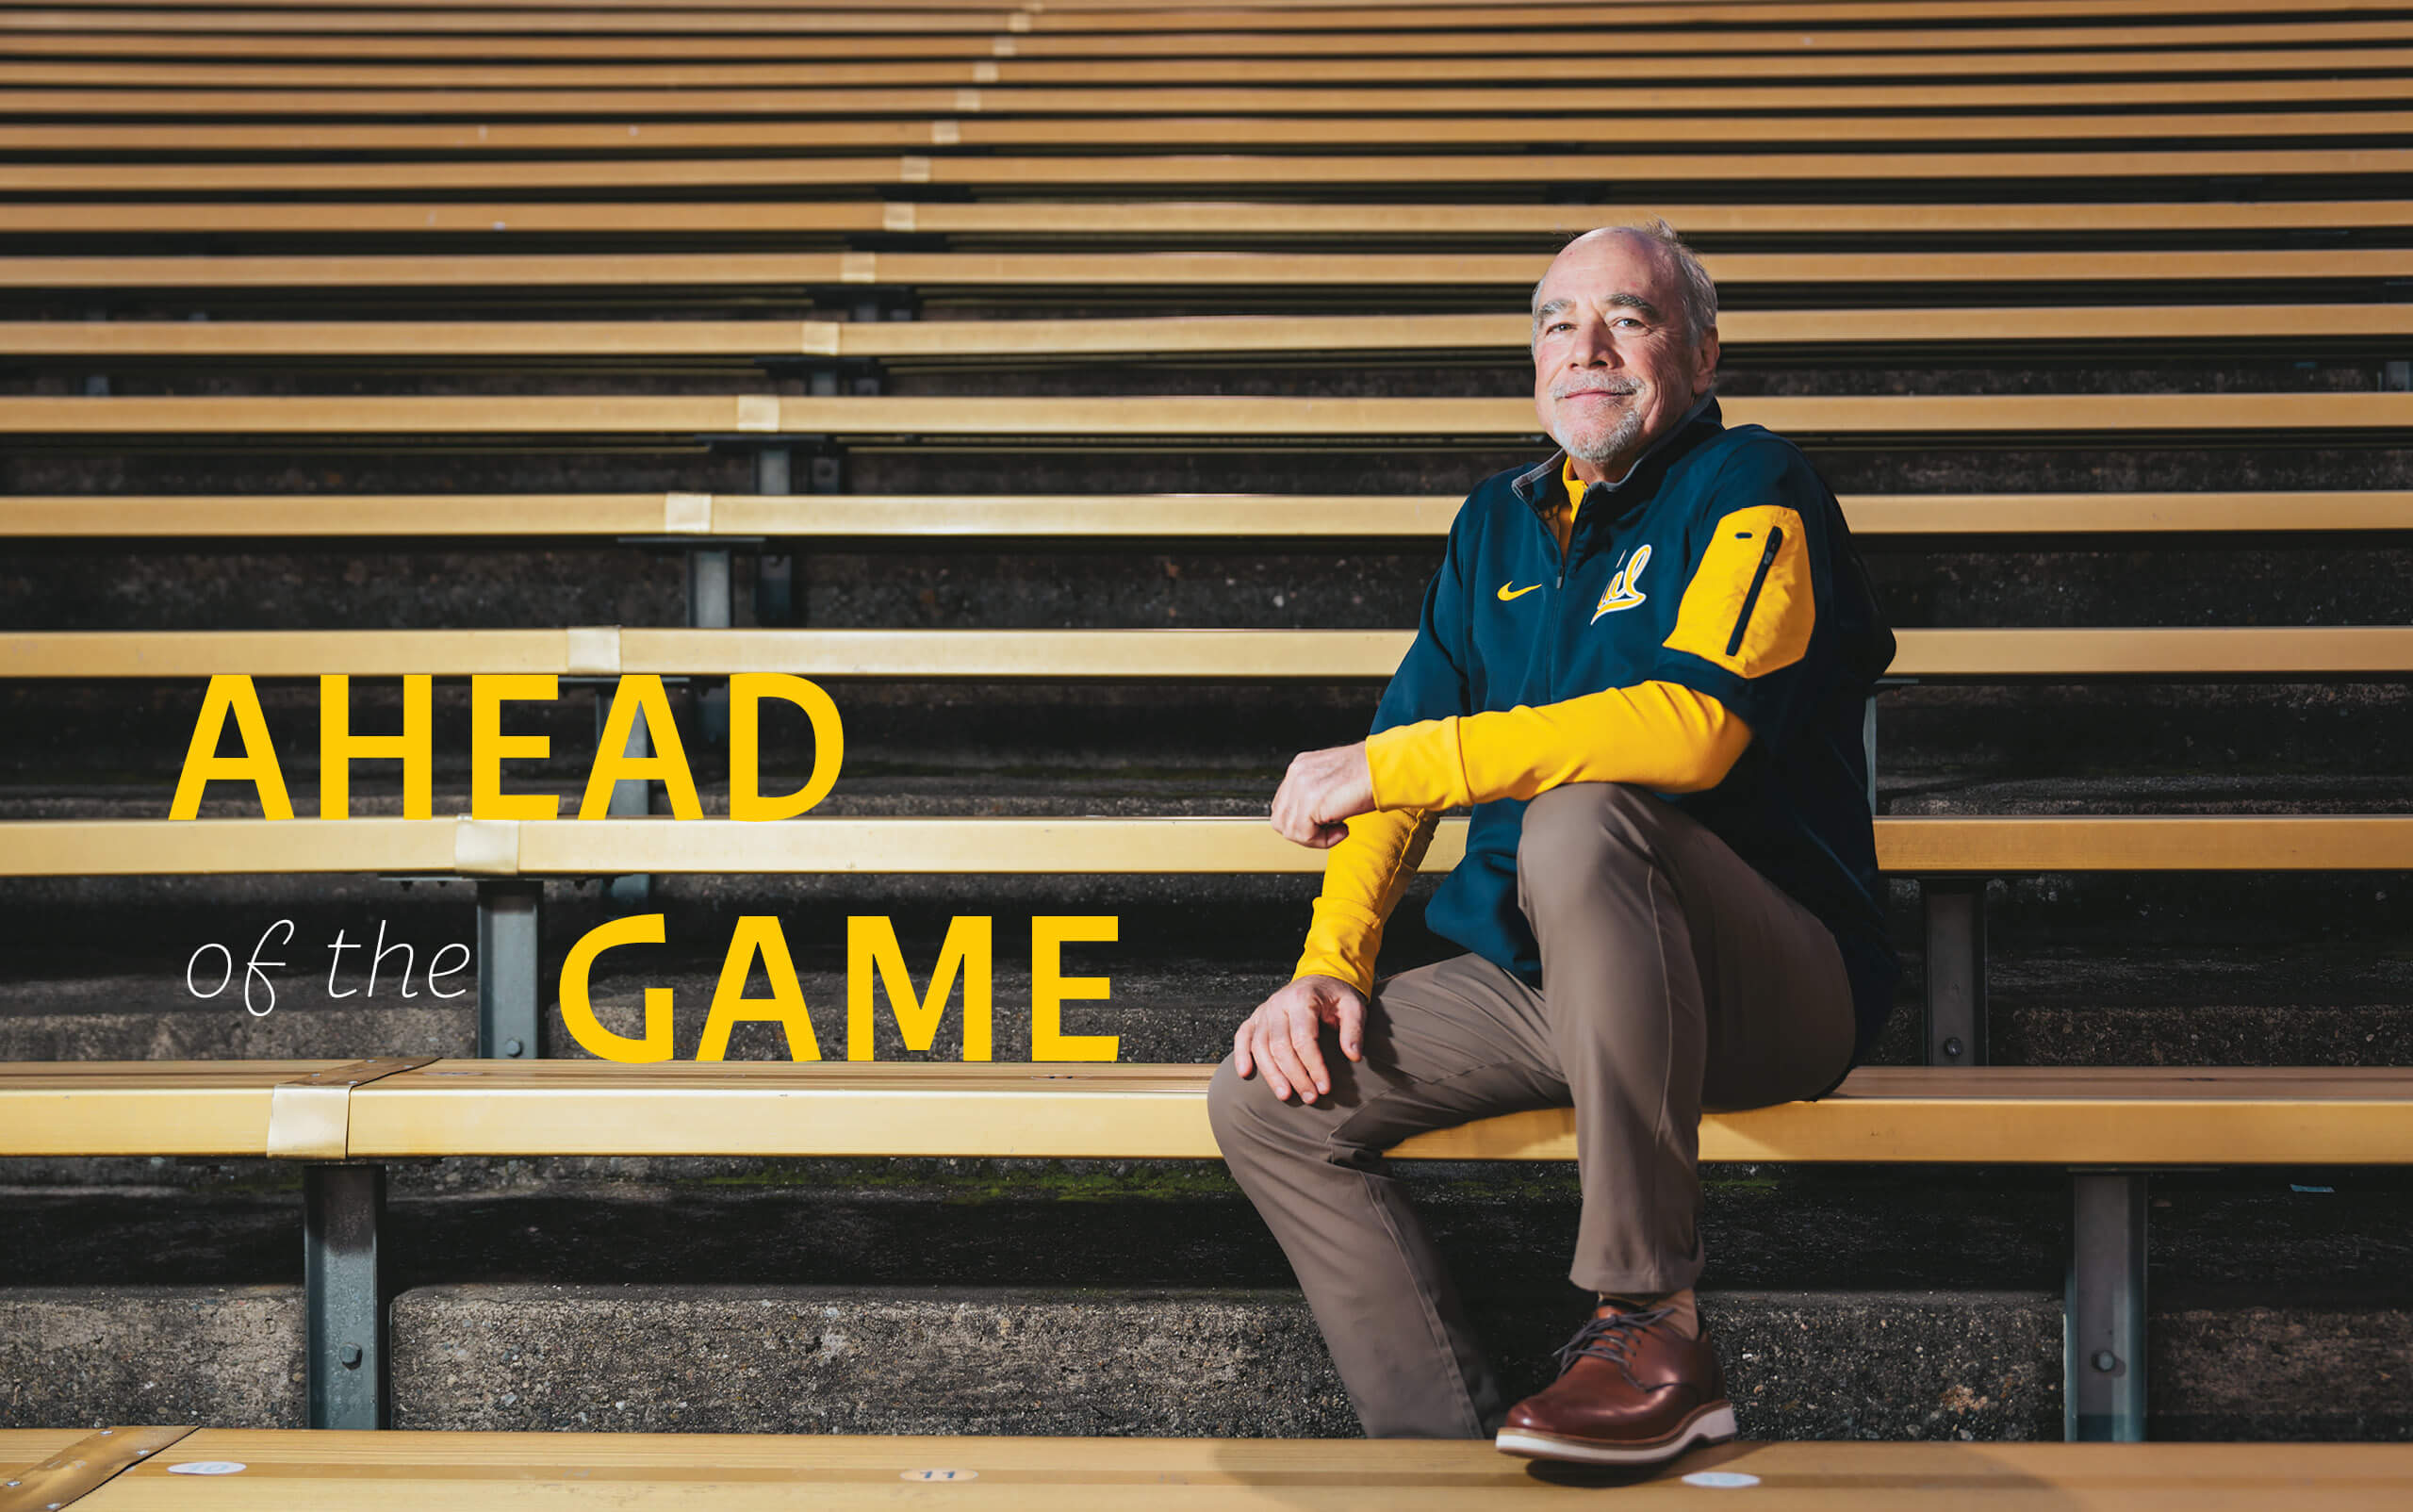 Man sitting on gold bleachers wearing a Cal shirt. The text on the image reads: Ahead of the game.